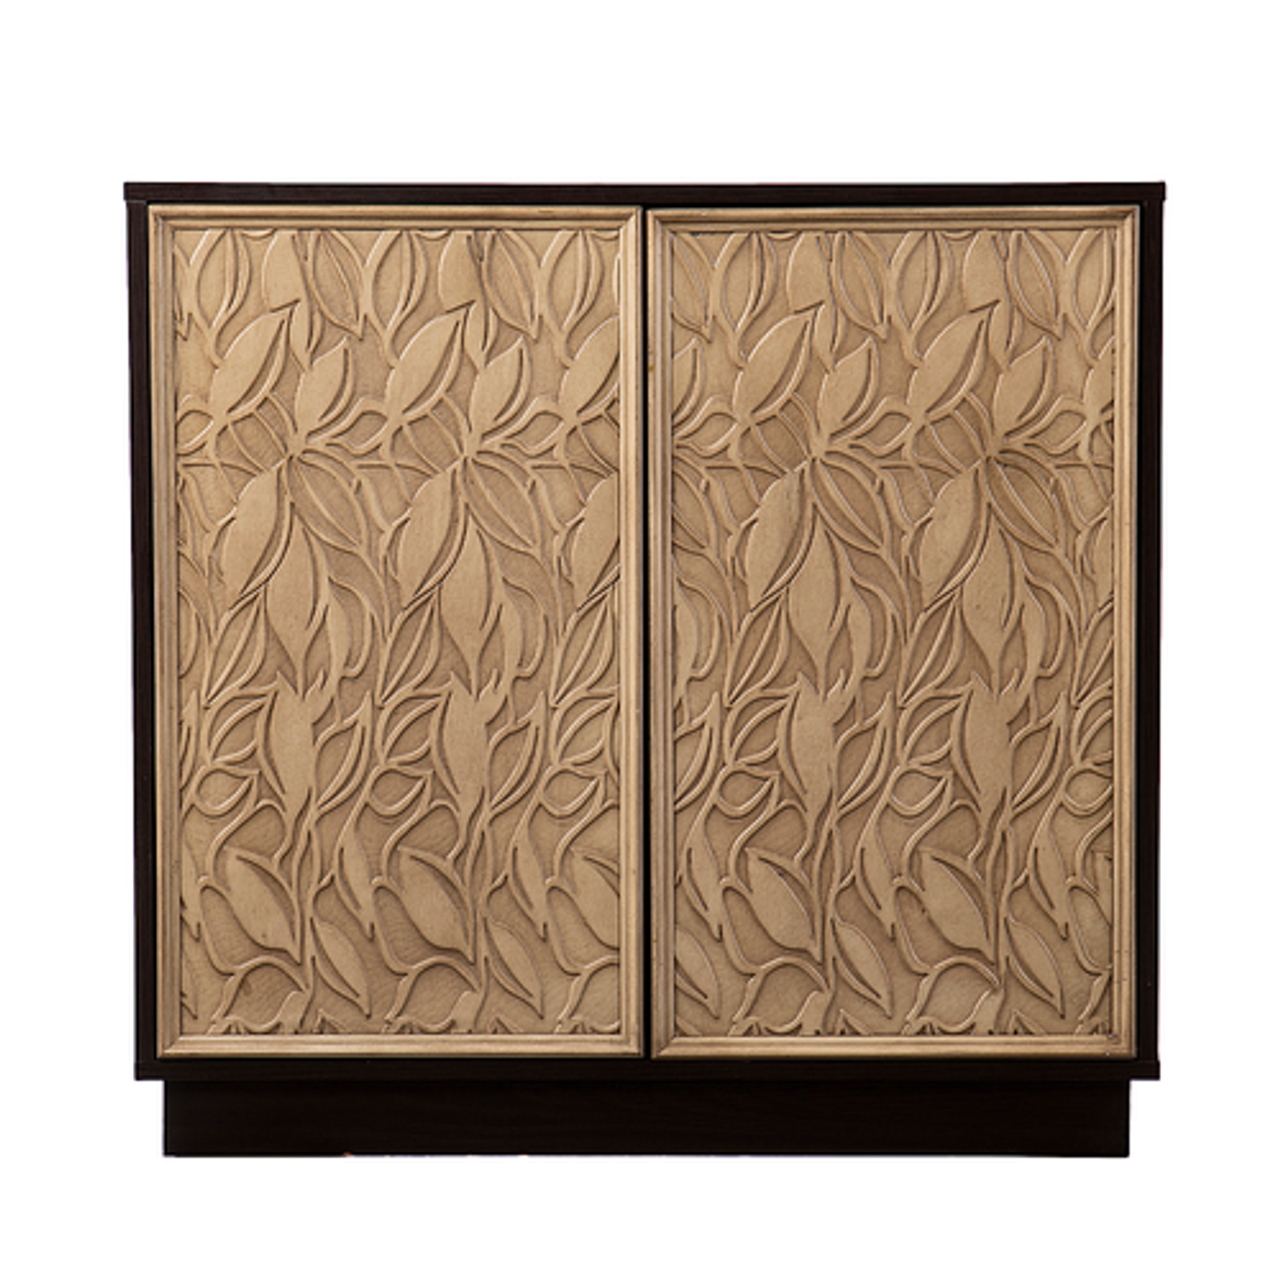 Southern Enterprises - Edgevale Anywhere Accent Cabinet - Brown and cream finish